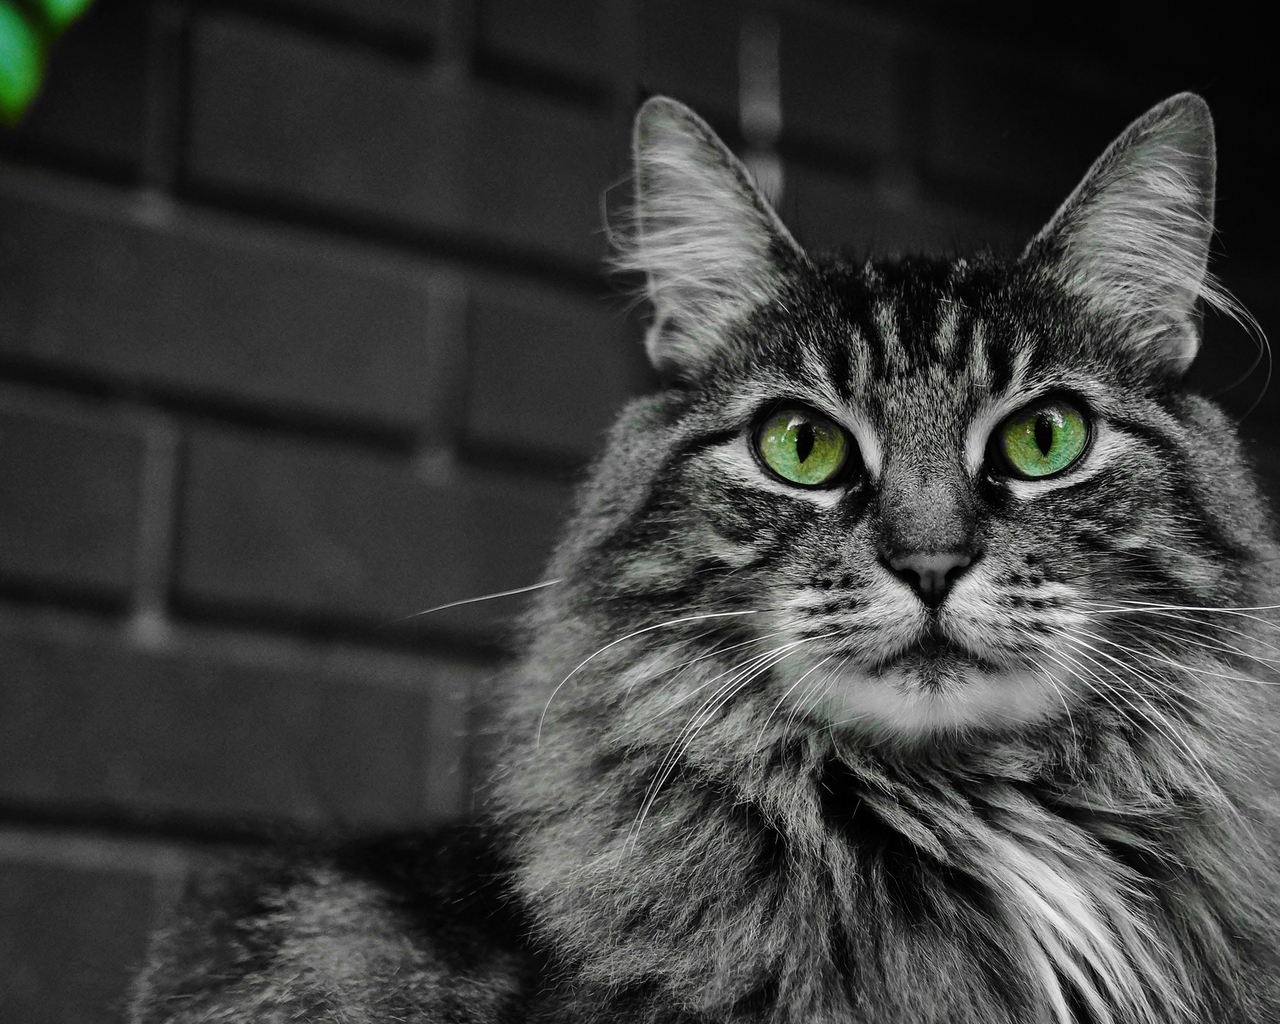 Fluffy Cat with Green Eyes for 1280 x 1024 resolution